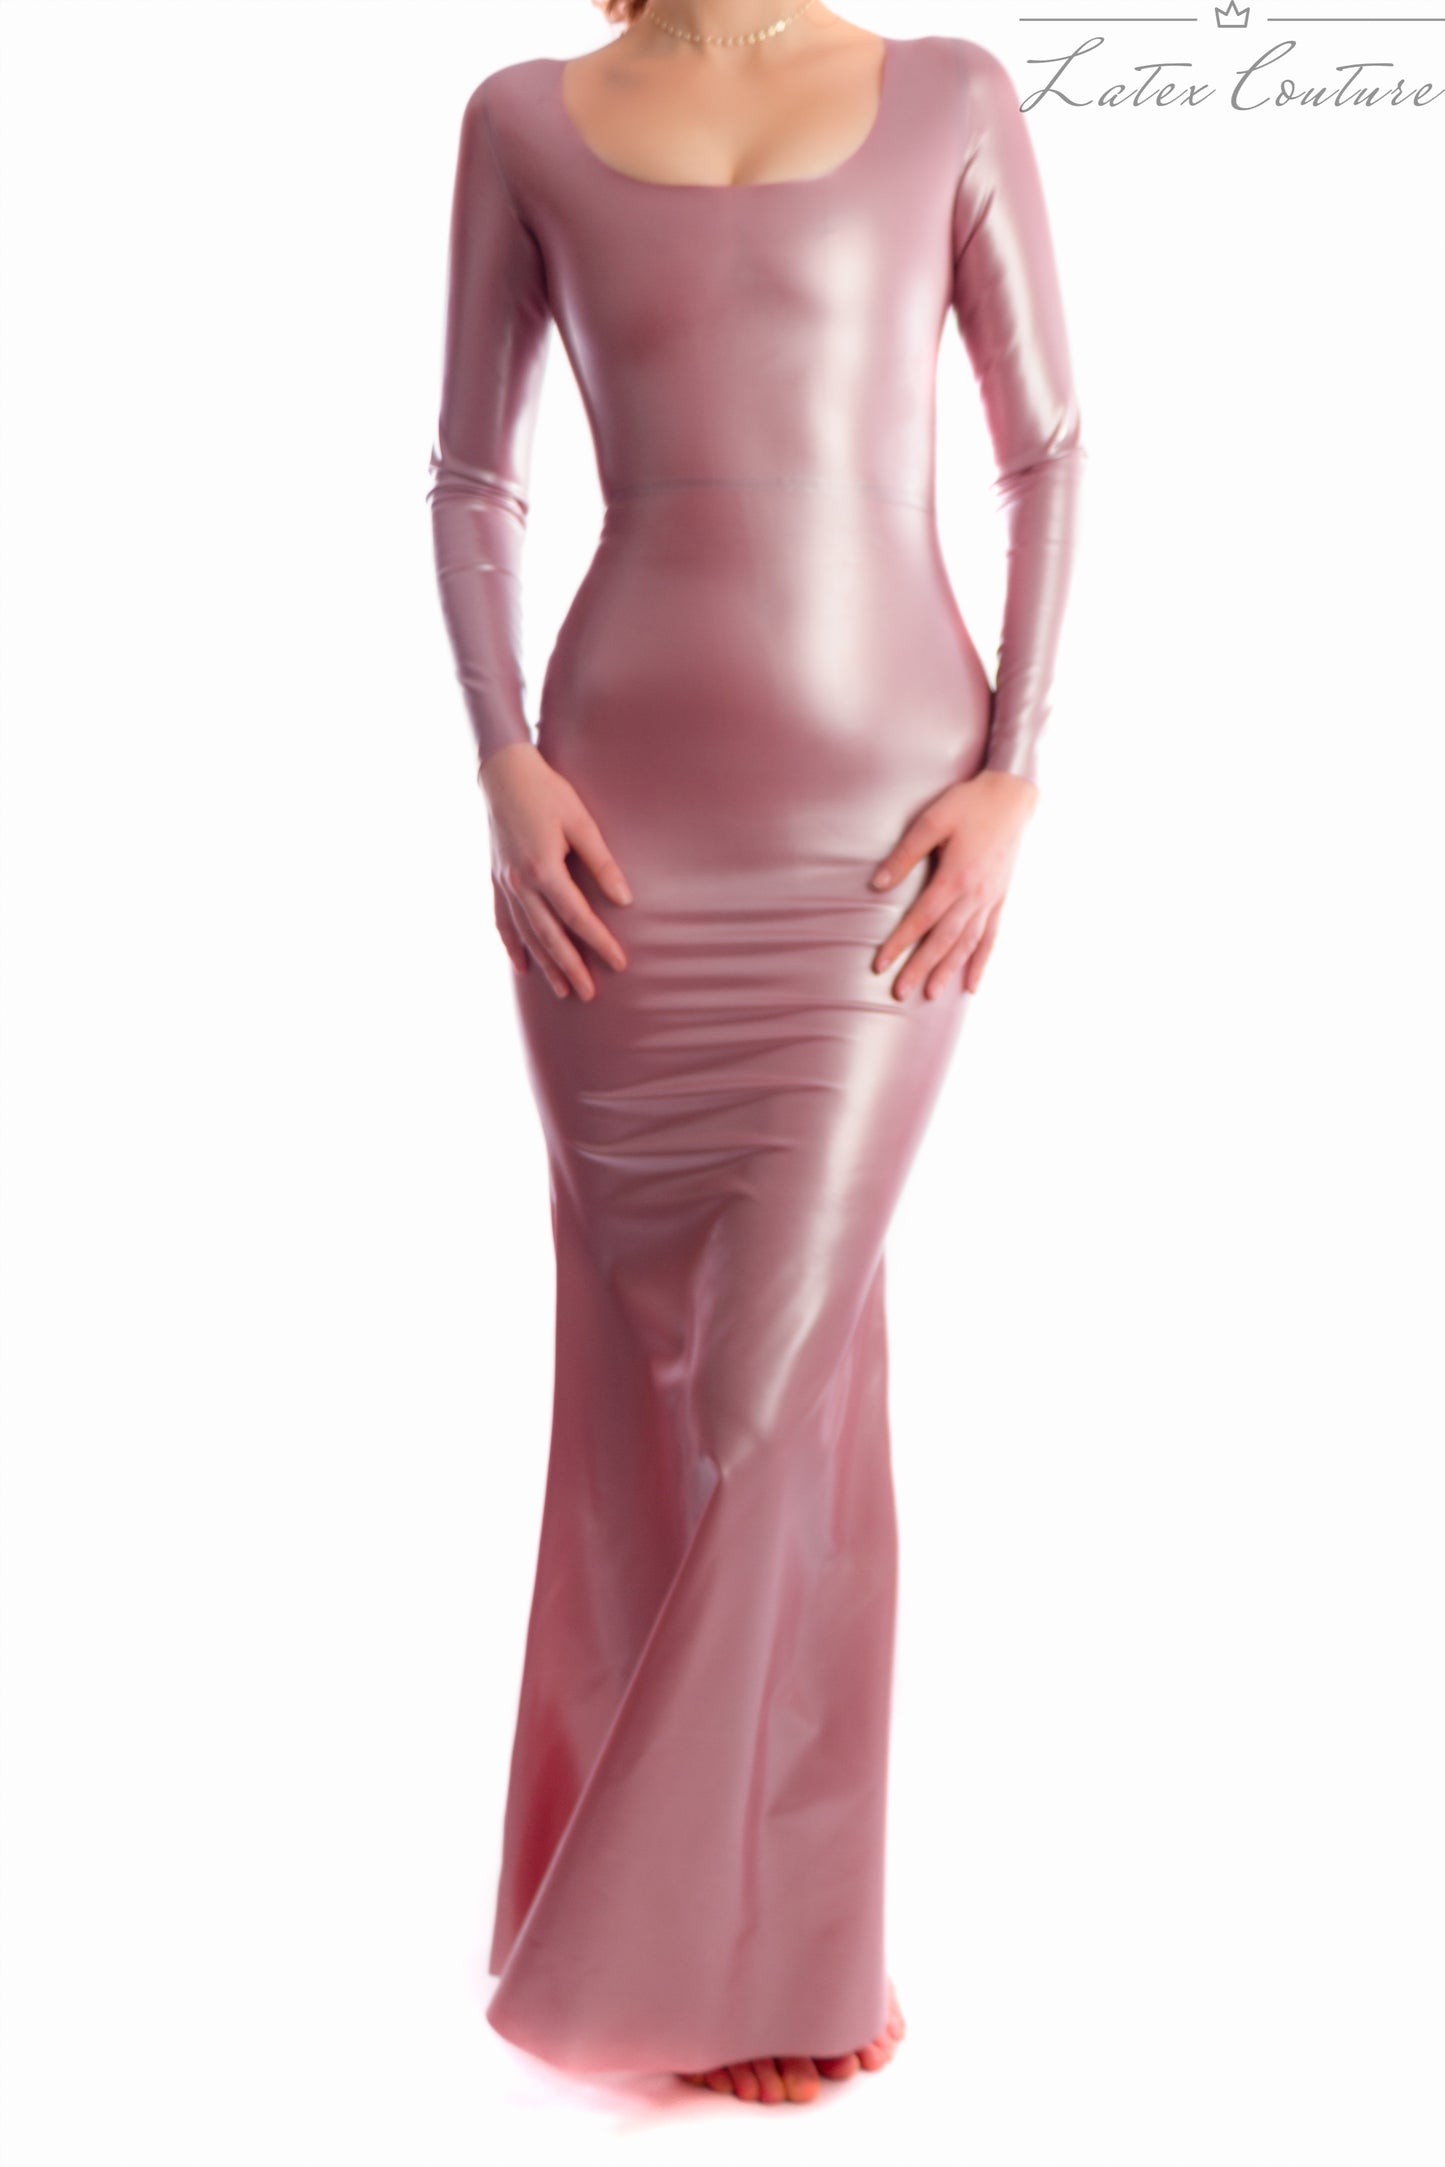 Latex Gown - Latex Long Sleeved Gown - Latex Couture